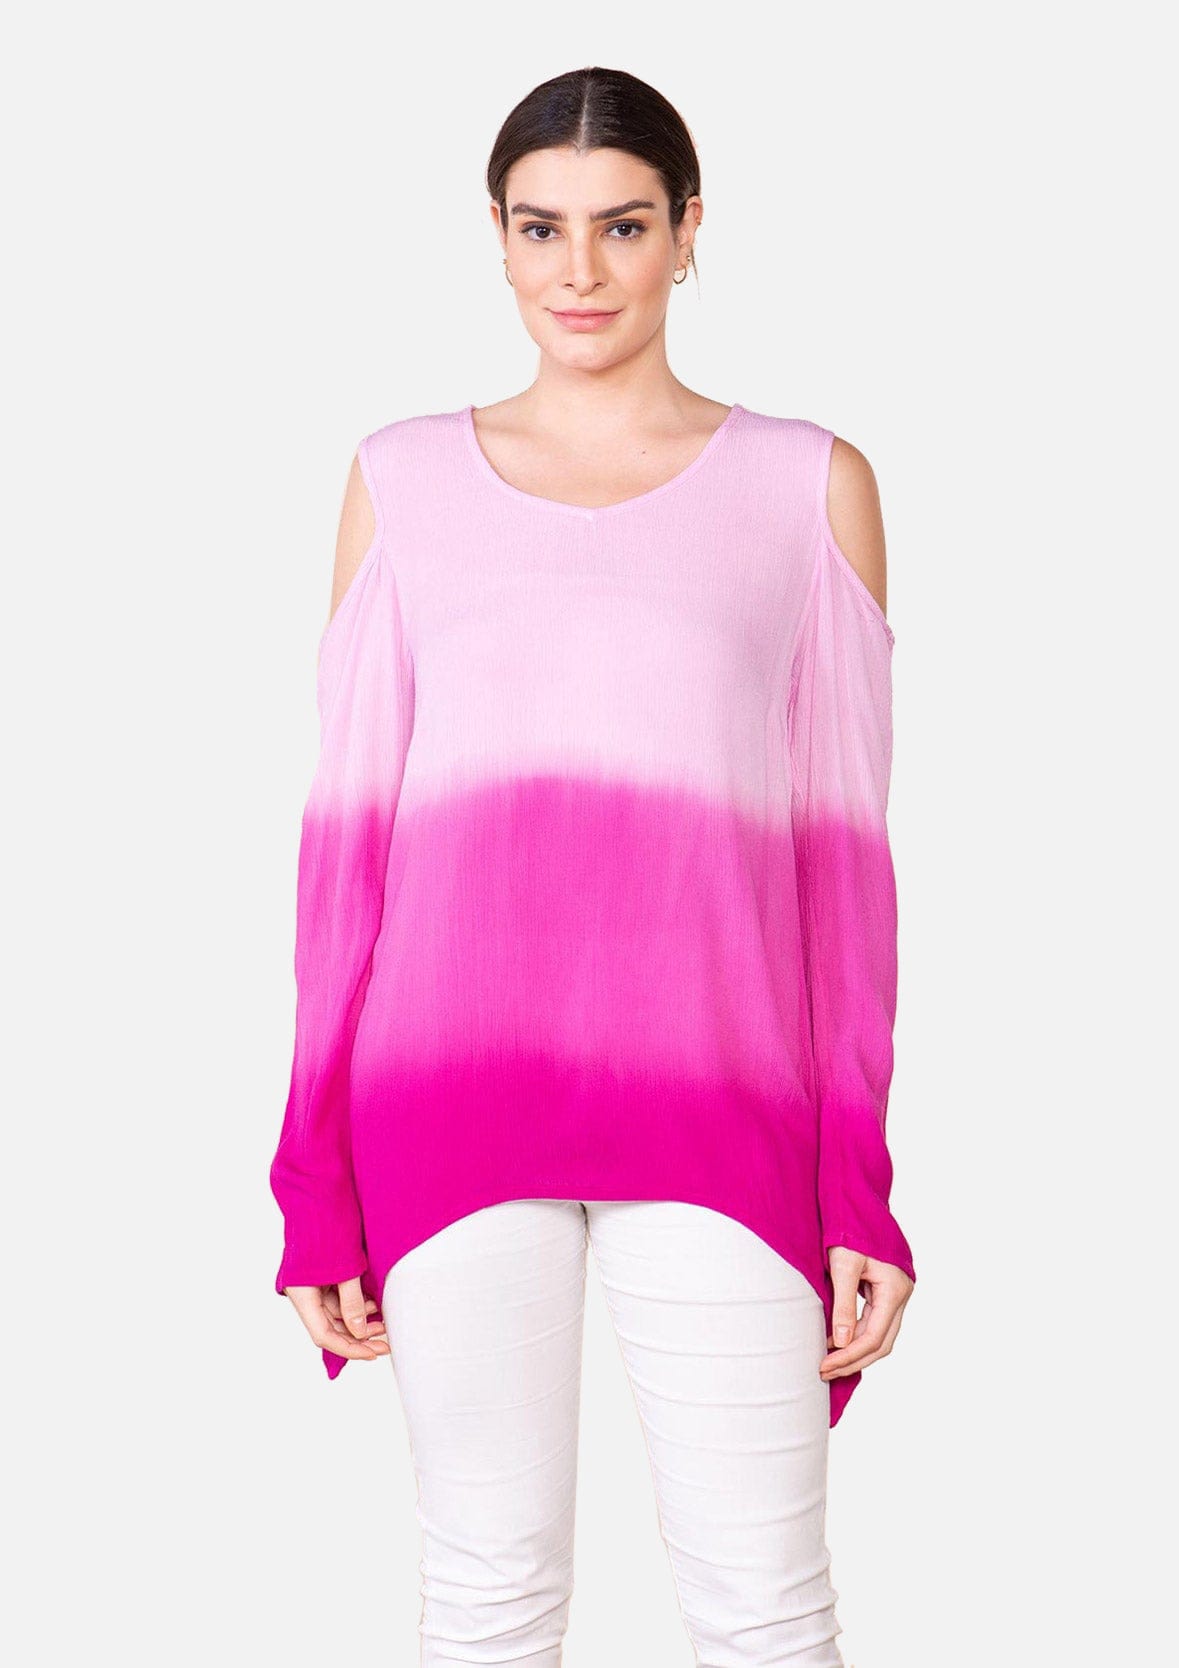 Rayon Ombre Top With Cold-Shoulder